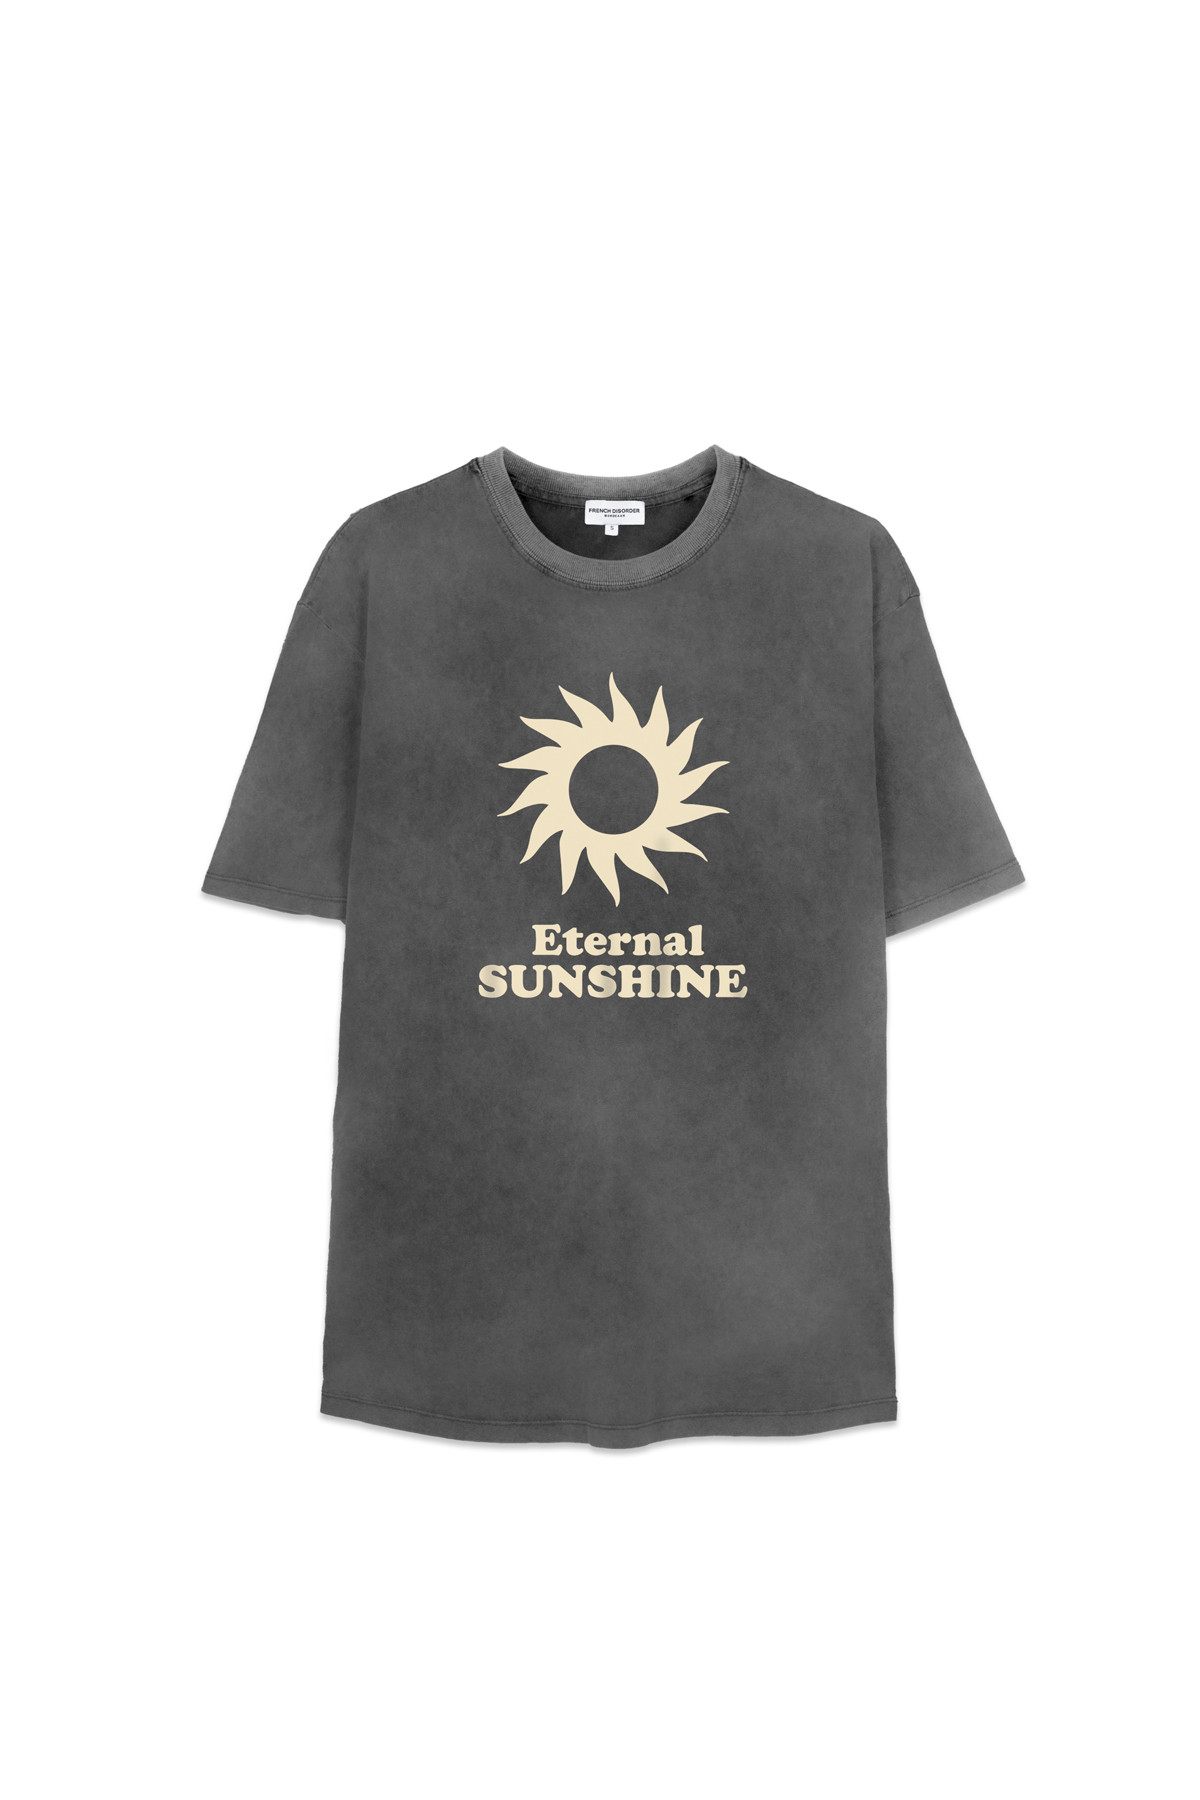 Photo de T-SHIRTS COL ROND Tshirt FEMME Washed ETERNAL SUNSHINE chez French Disorder